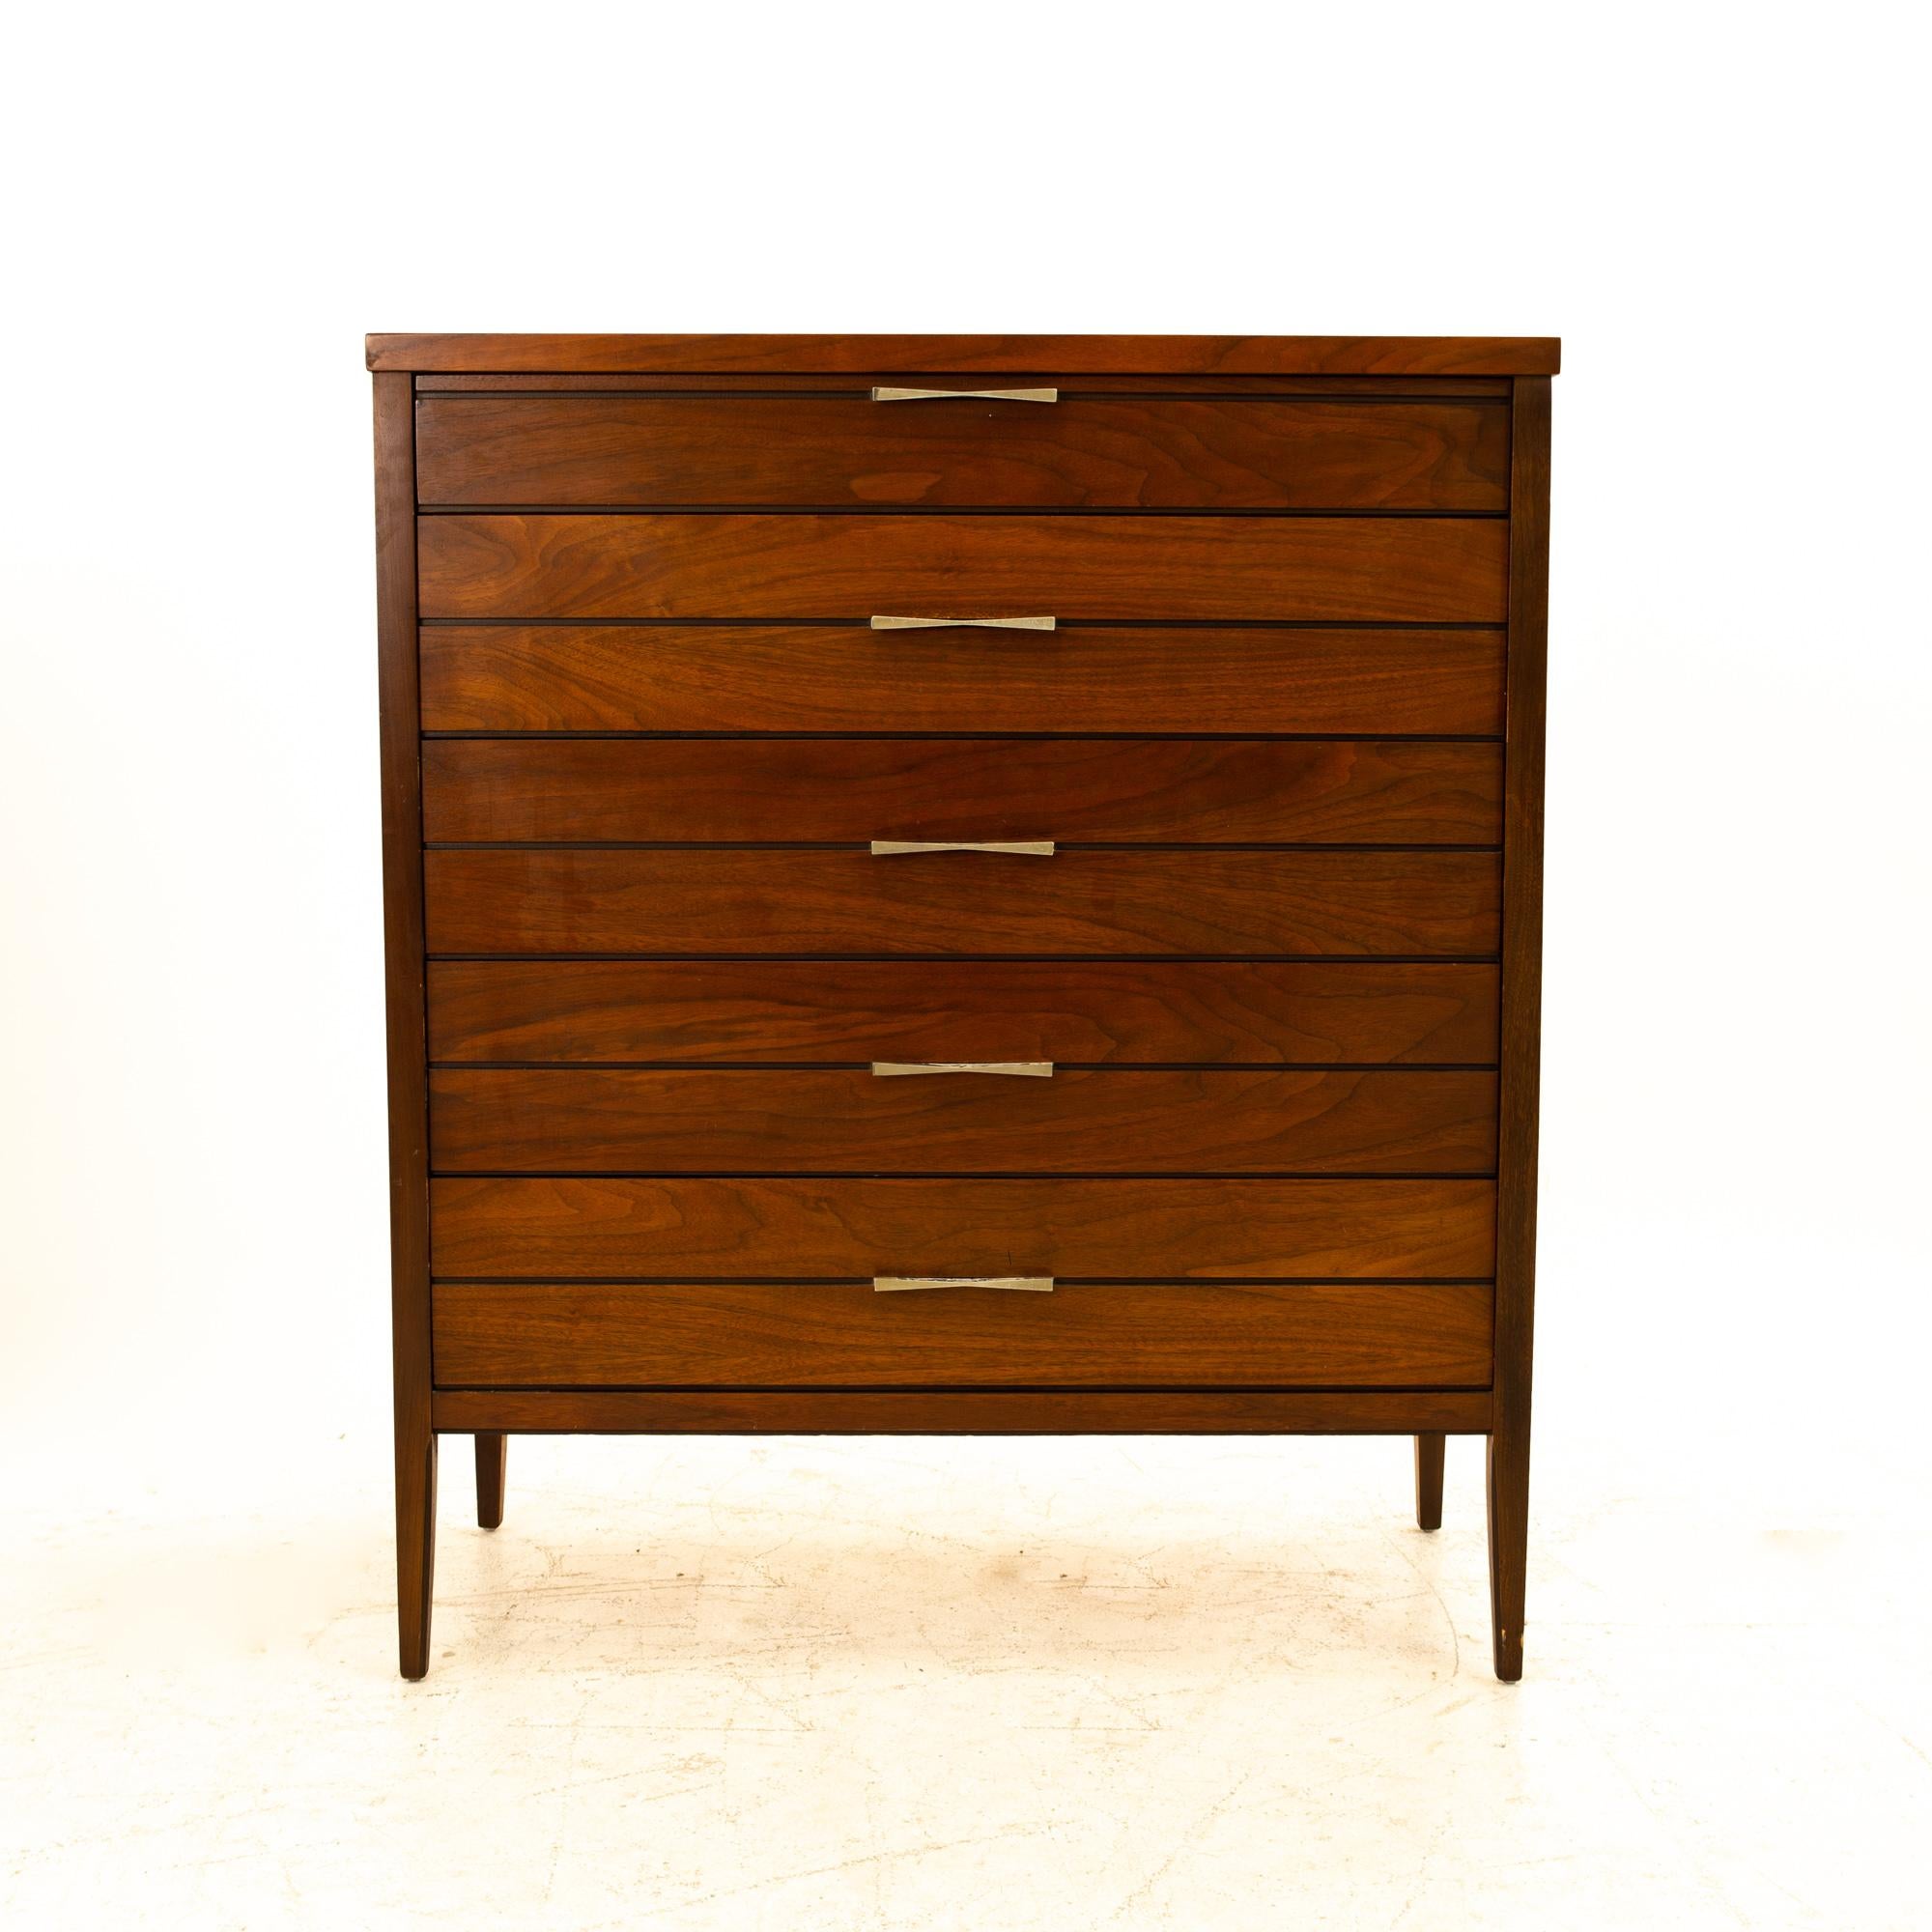 Lane Tuxedo midcentury walnut bow-tie highboy dresser
Dresser measures: 38.25 wide x 18 deep x 45 high

All pieces of furniture can be had in what we call restored vintage condition. That means the piece is restored upon purchase so it’s free of